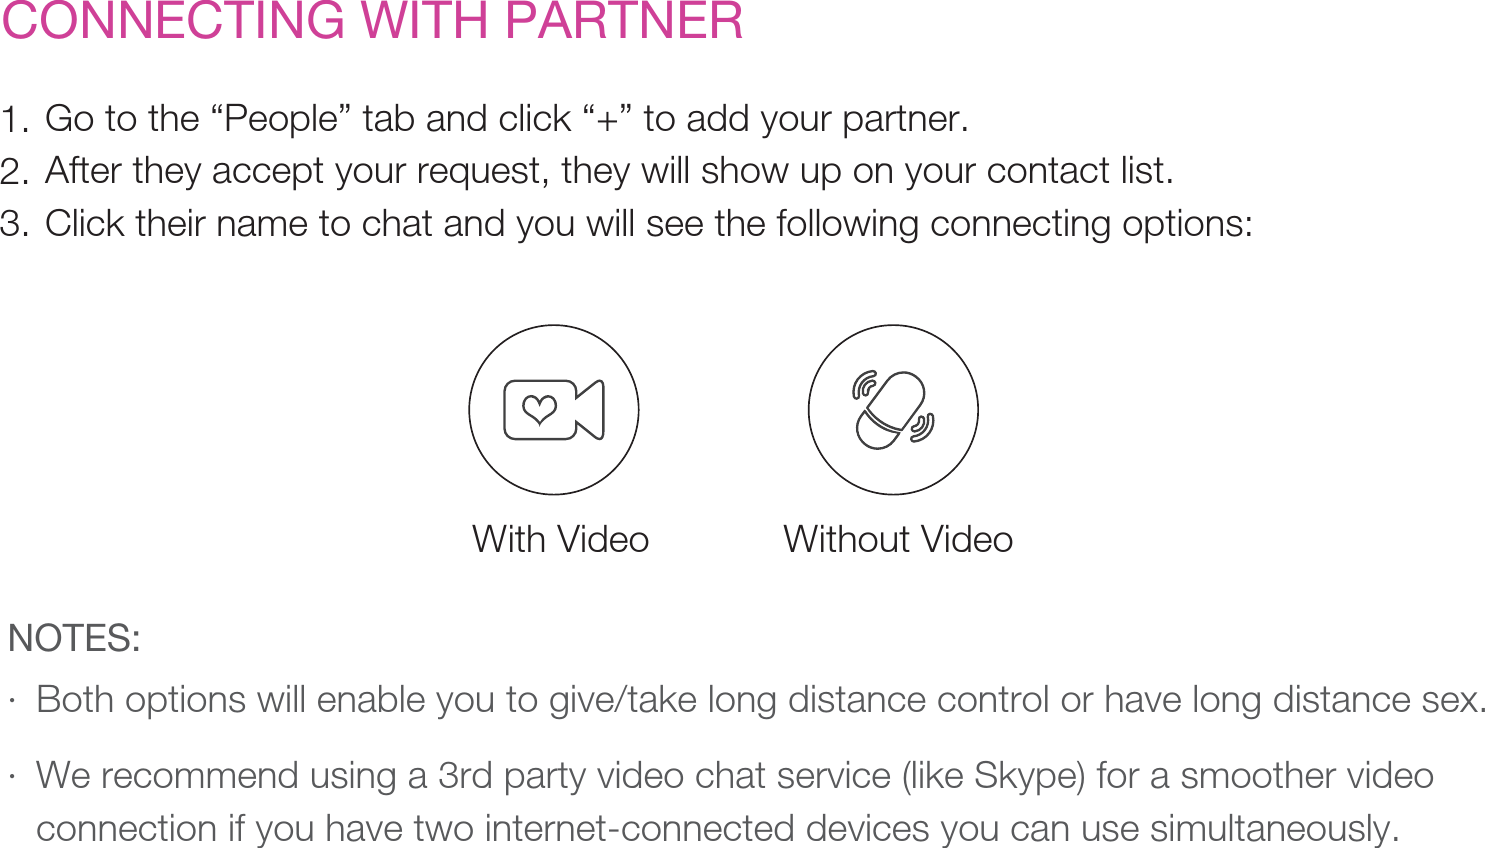 CONNECTING WITH PARTNERGo to the “People” tab and click “+” to add your partner. After they accept your request, they will show up on your contact list.Click their name to chat and you will see the following connecting options:              1.2.3.Both options will enable you to give/take long distance control or have long distance sex.We recommend using a 3rd party video chat service (like Skype) for a smoother video connection if you have two internet-connected devices you can use simultaneously. · · NOTES: With Video Without Video